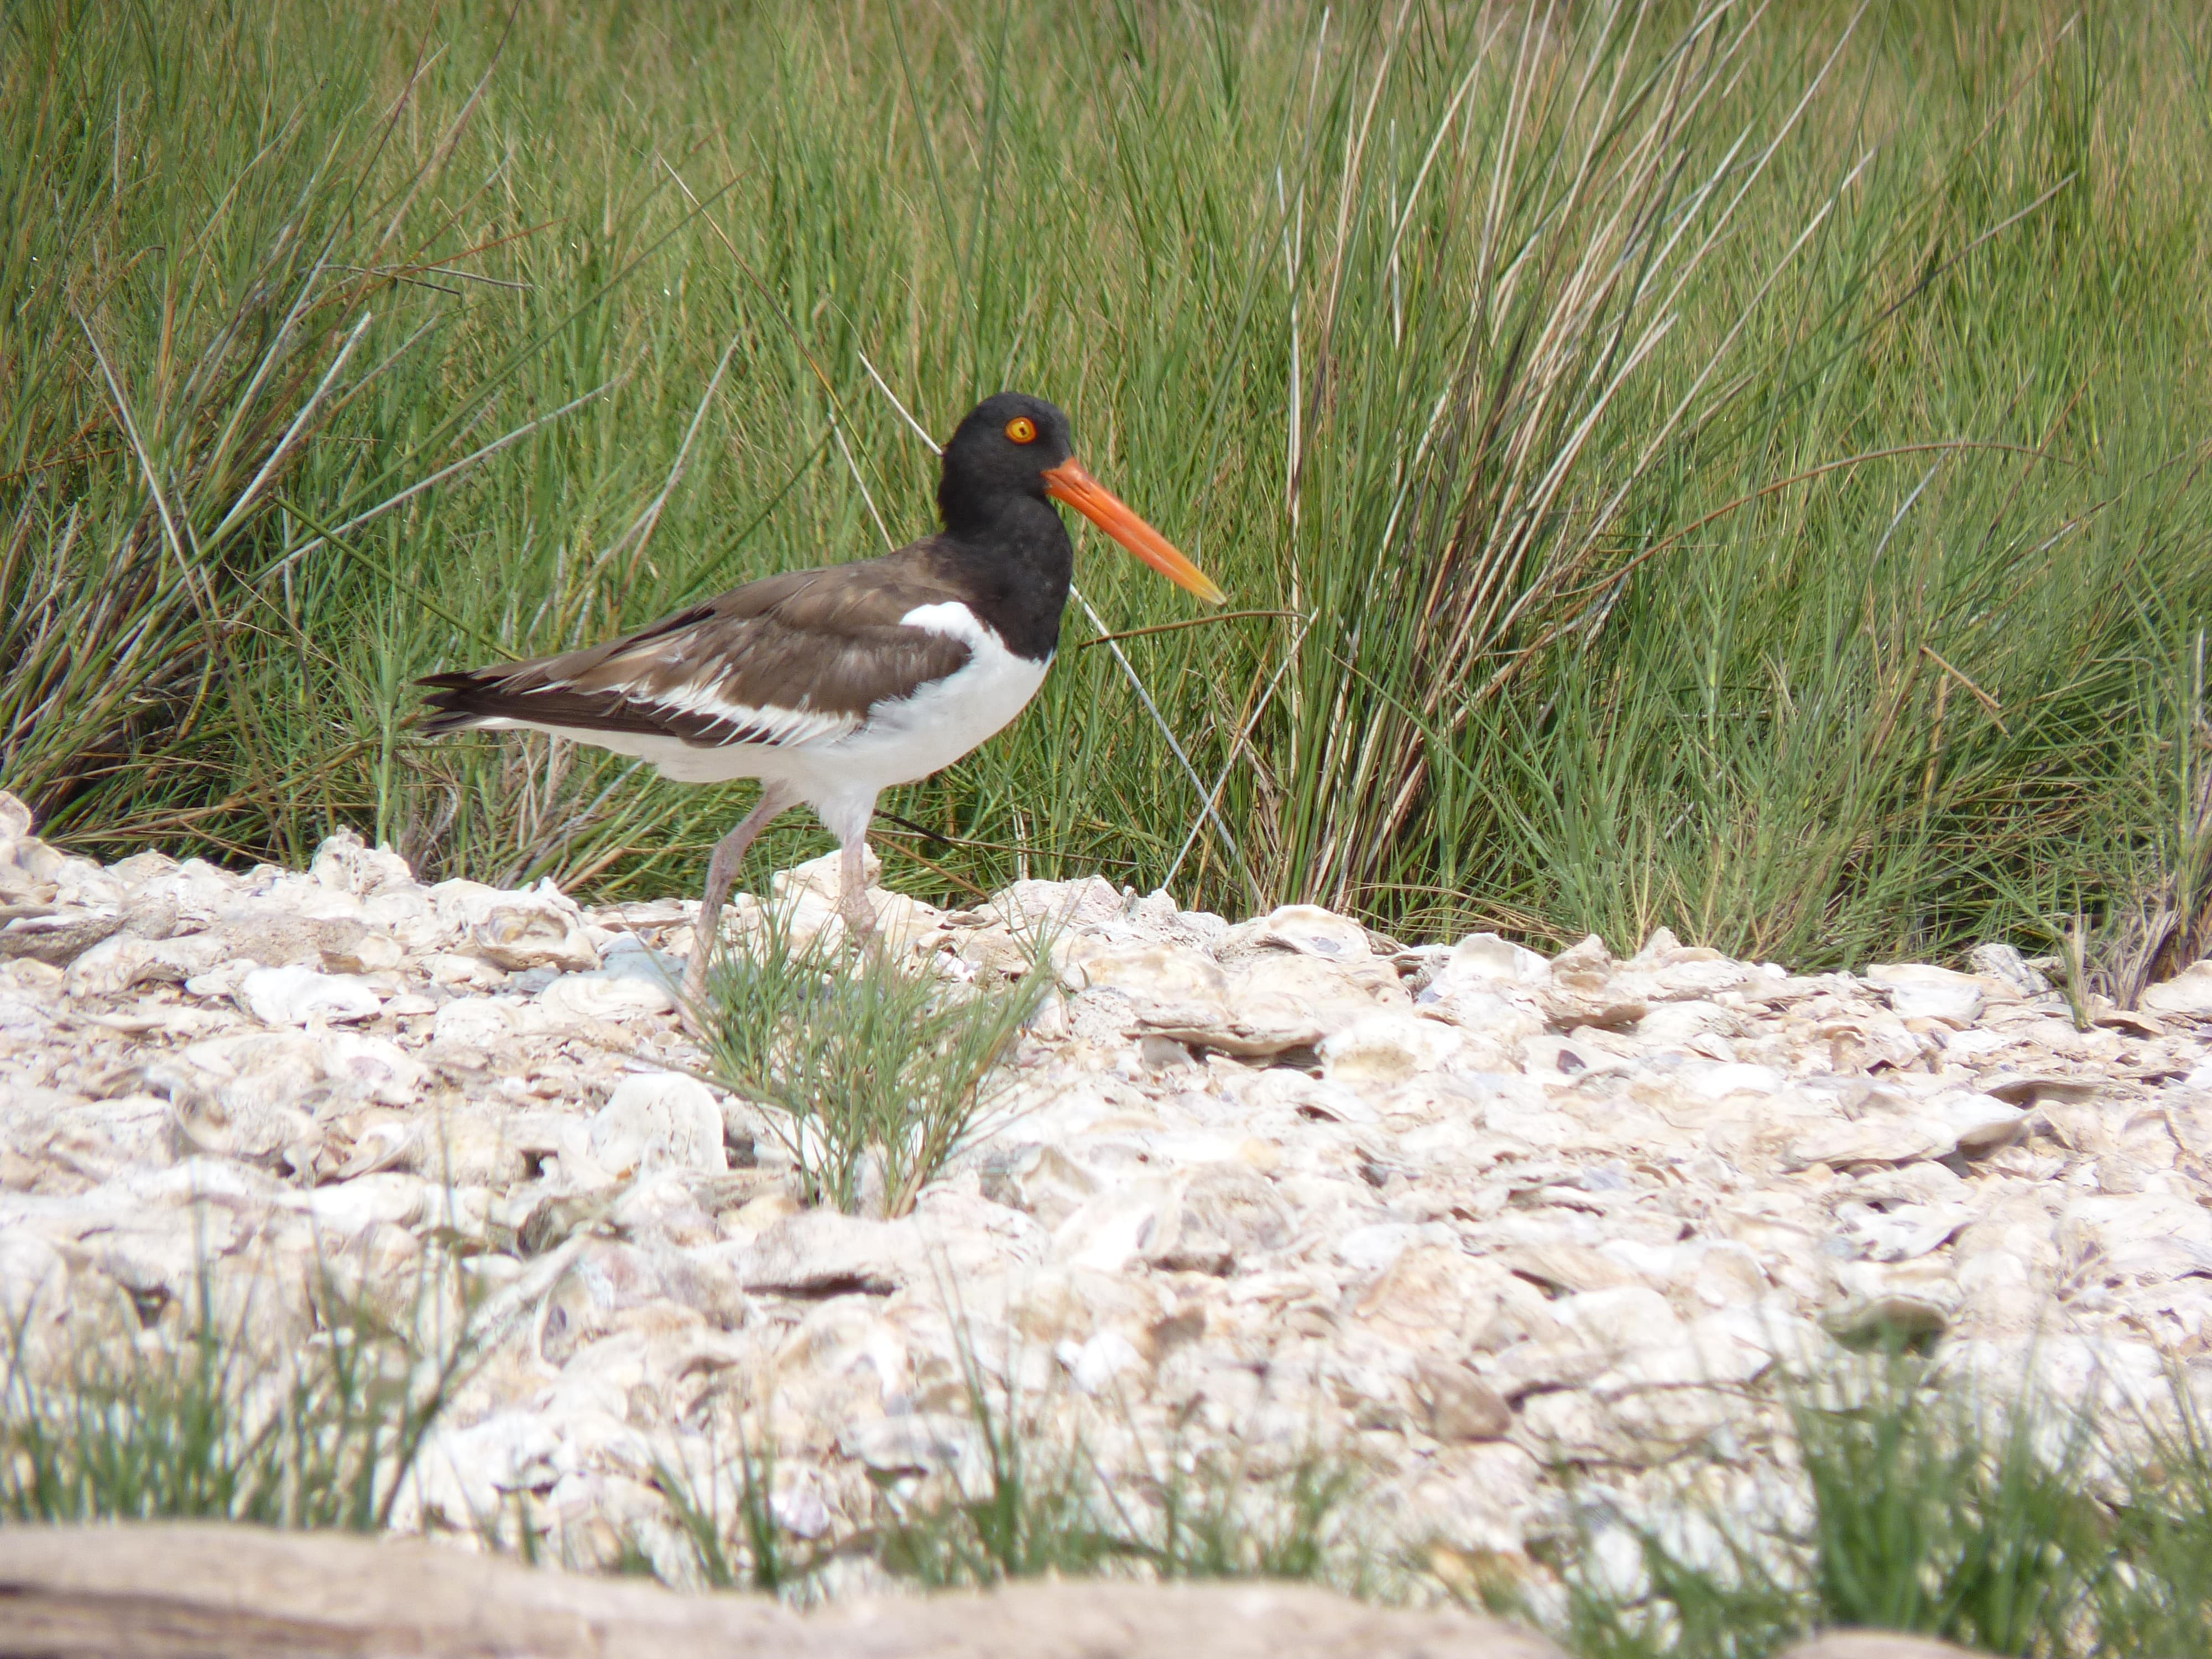 A brown and white bird with a long orange beak rests near a marsh.